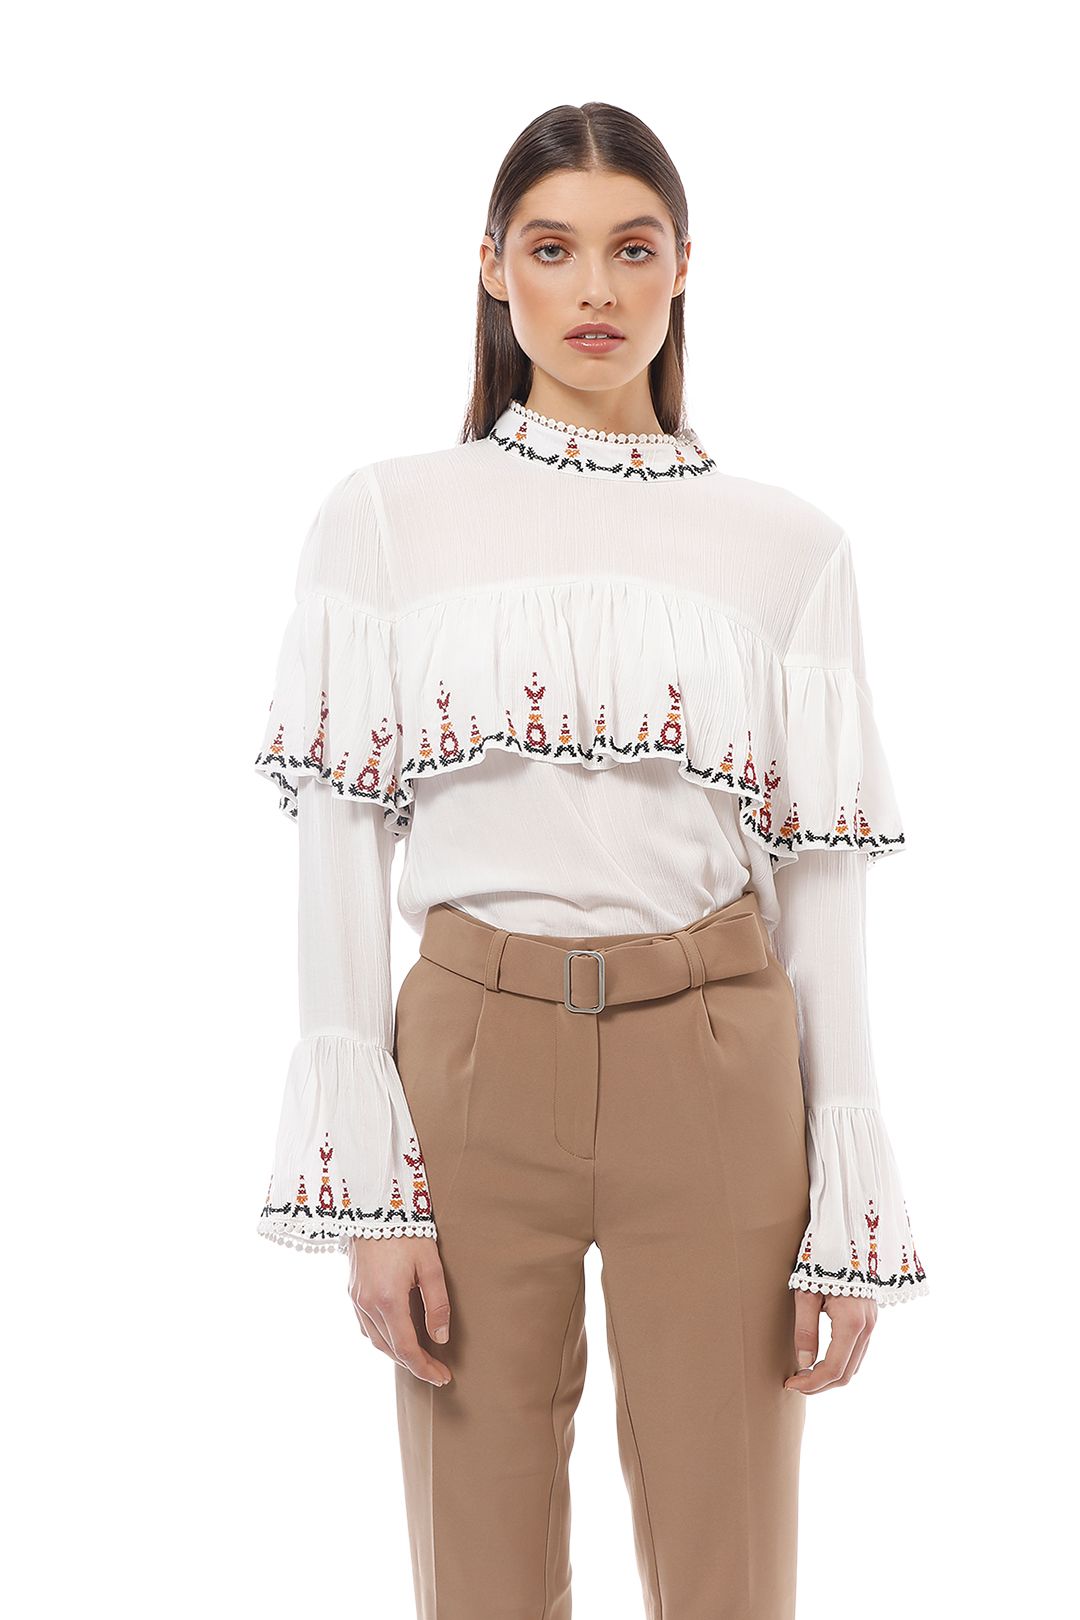 Gysette - Hana Embroidered Top - Ivory - Close Up